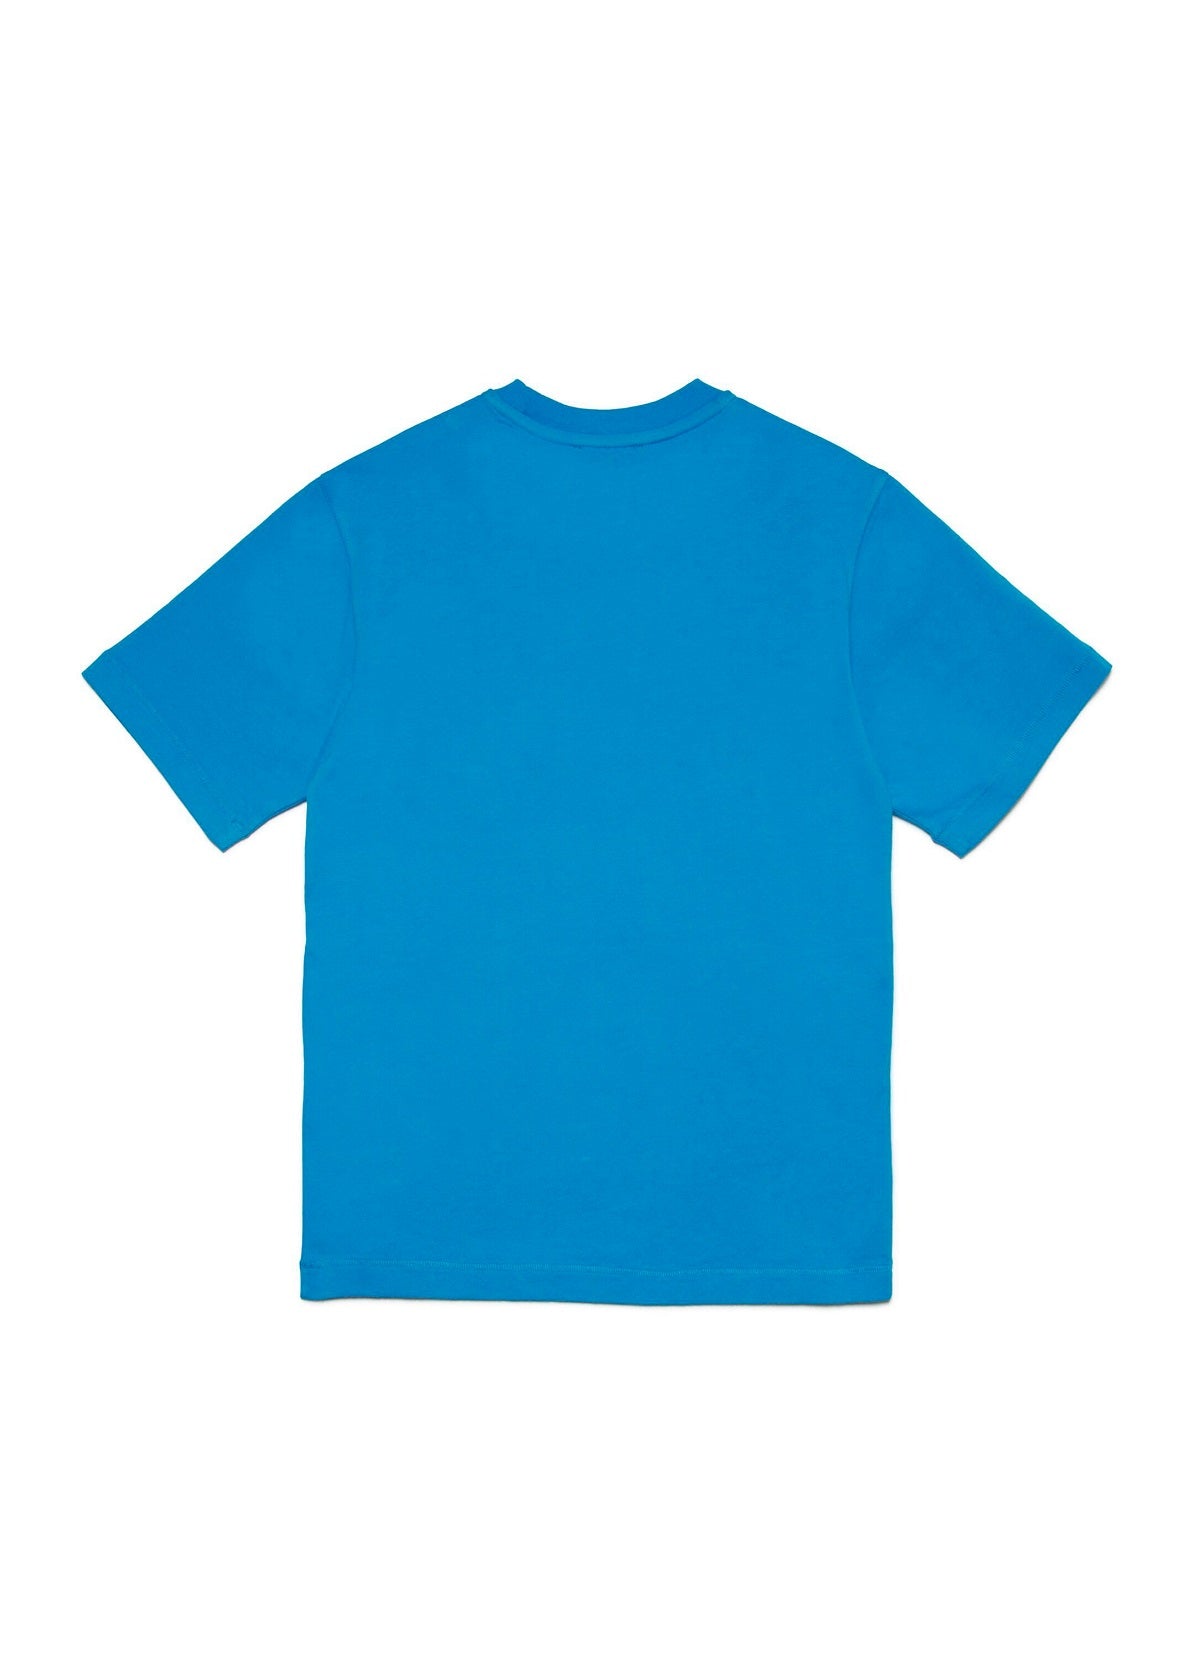 Diesel Kids T-shirt con Stampa Puffy Utility per Bambini